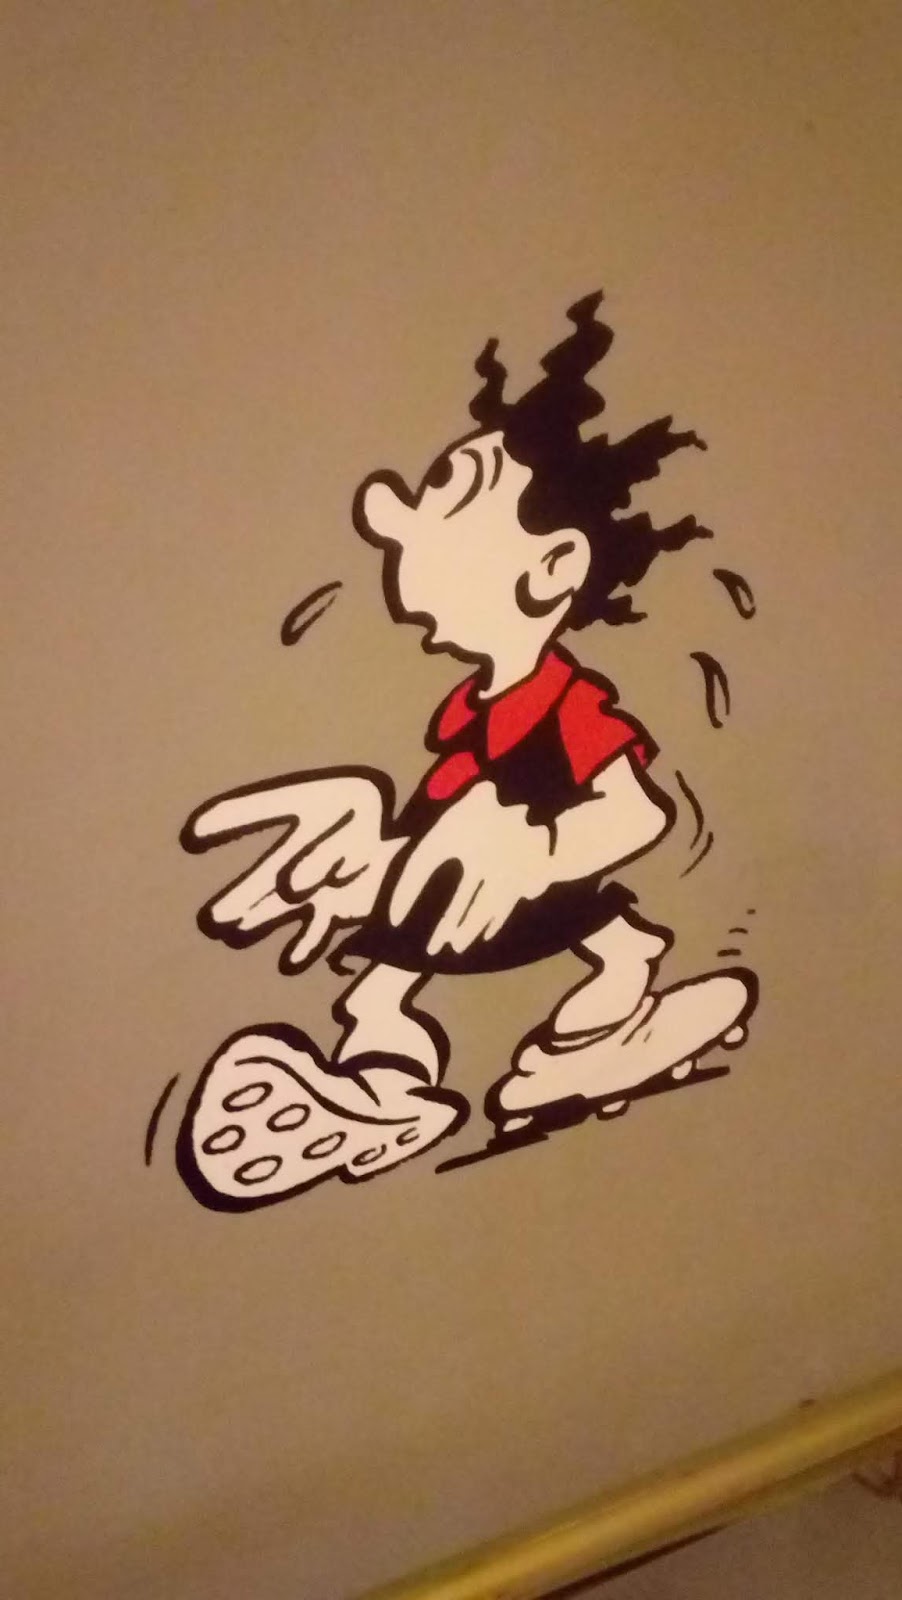 The Beano - A Manual for Mischief - Victoria and Albert Museum 2018